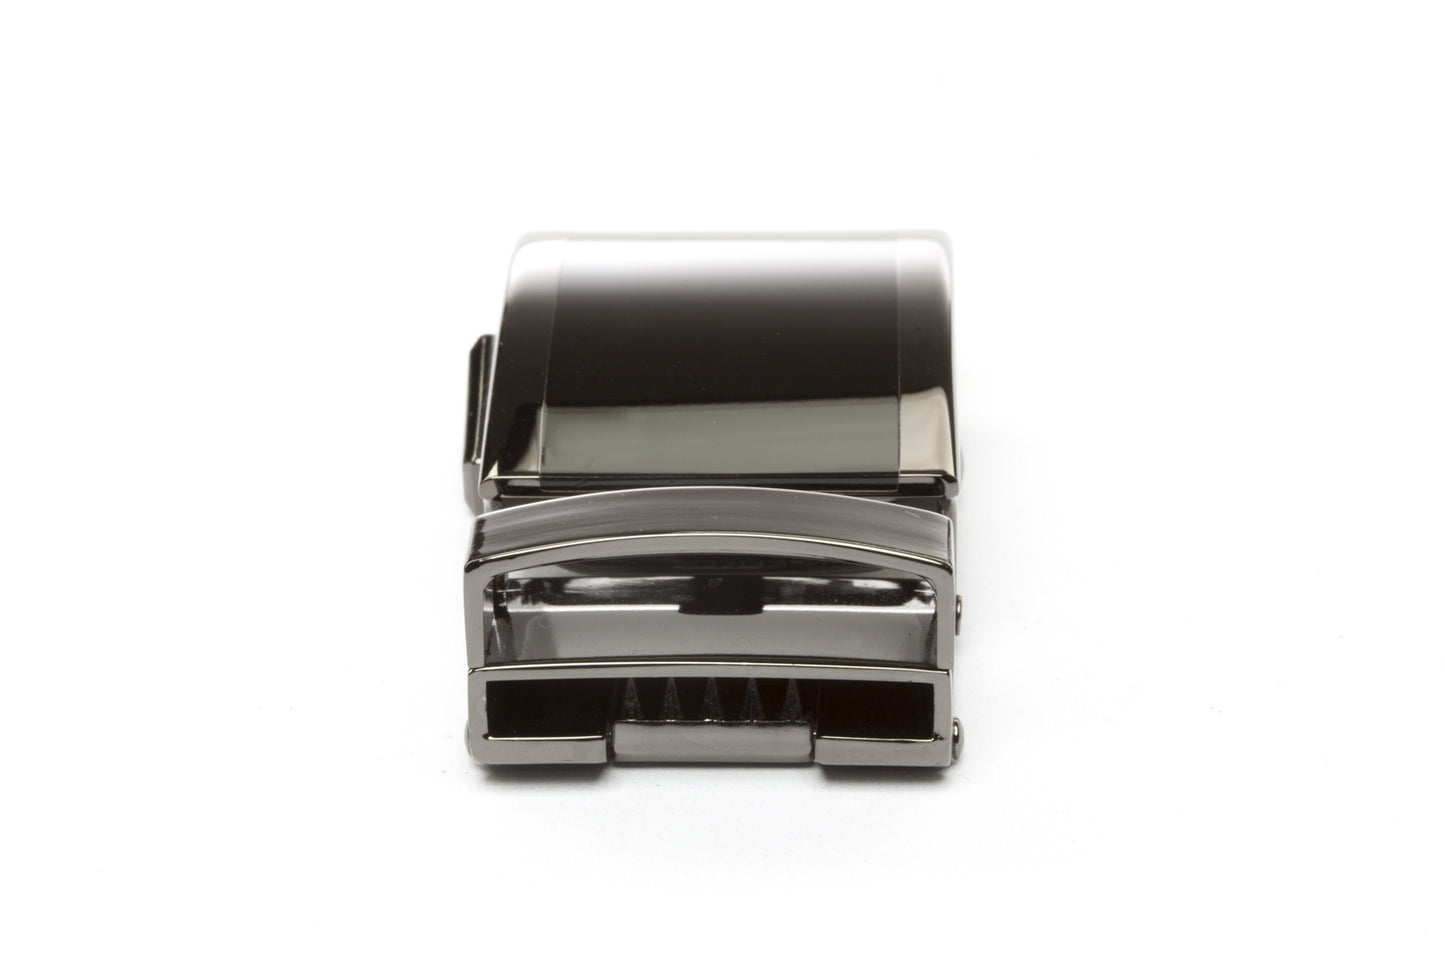 Men's onyx ratchet belt buckle in smoked gunmetal with a 1.25-inch width, rear view.